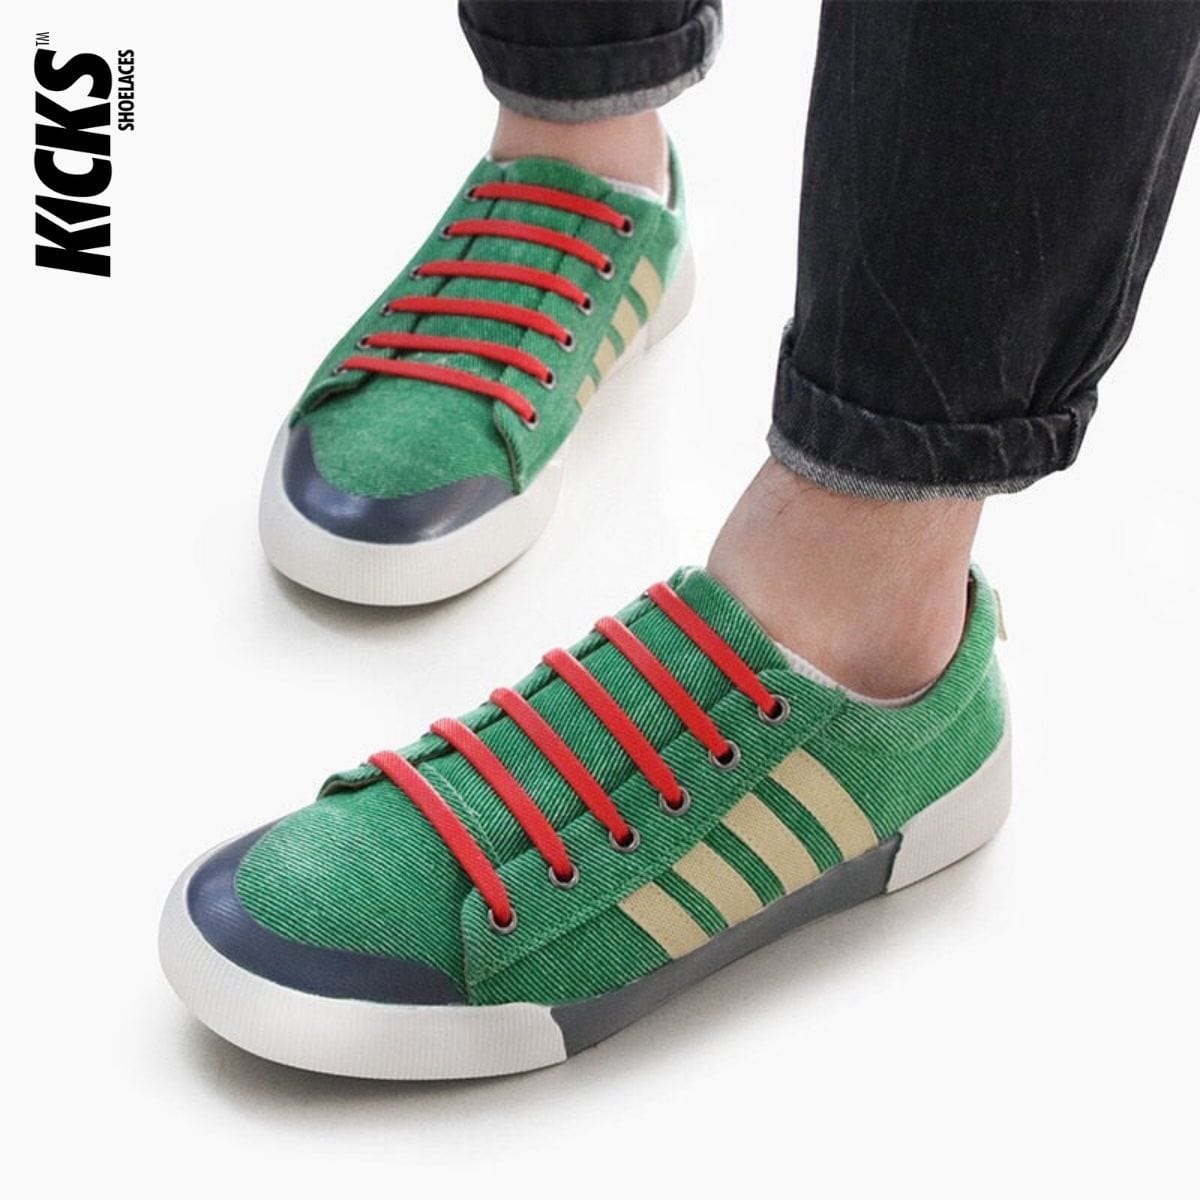 tieless-shoelace-replacements-on-sneakers-green